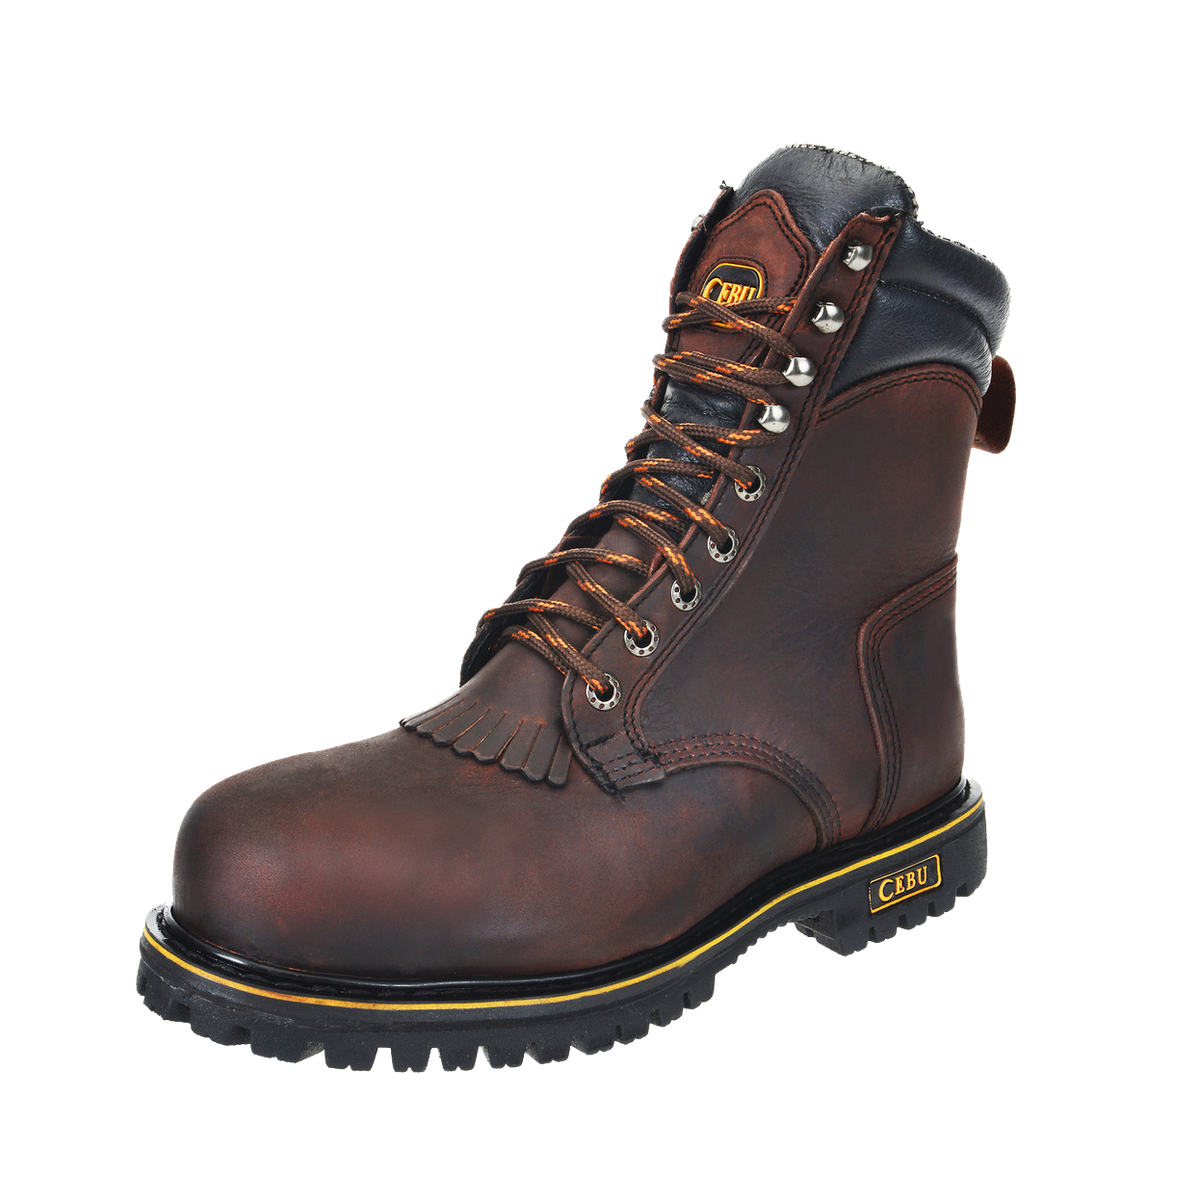 CEBU ATK LACER STEEL TOE | Genuine Leather Cowboy Boots and Hats